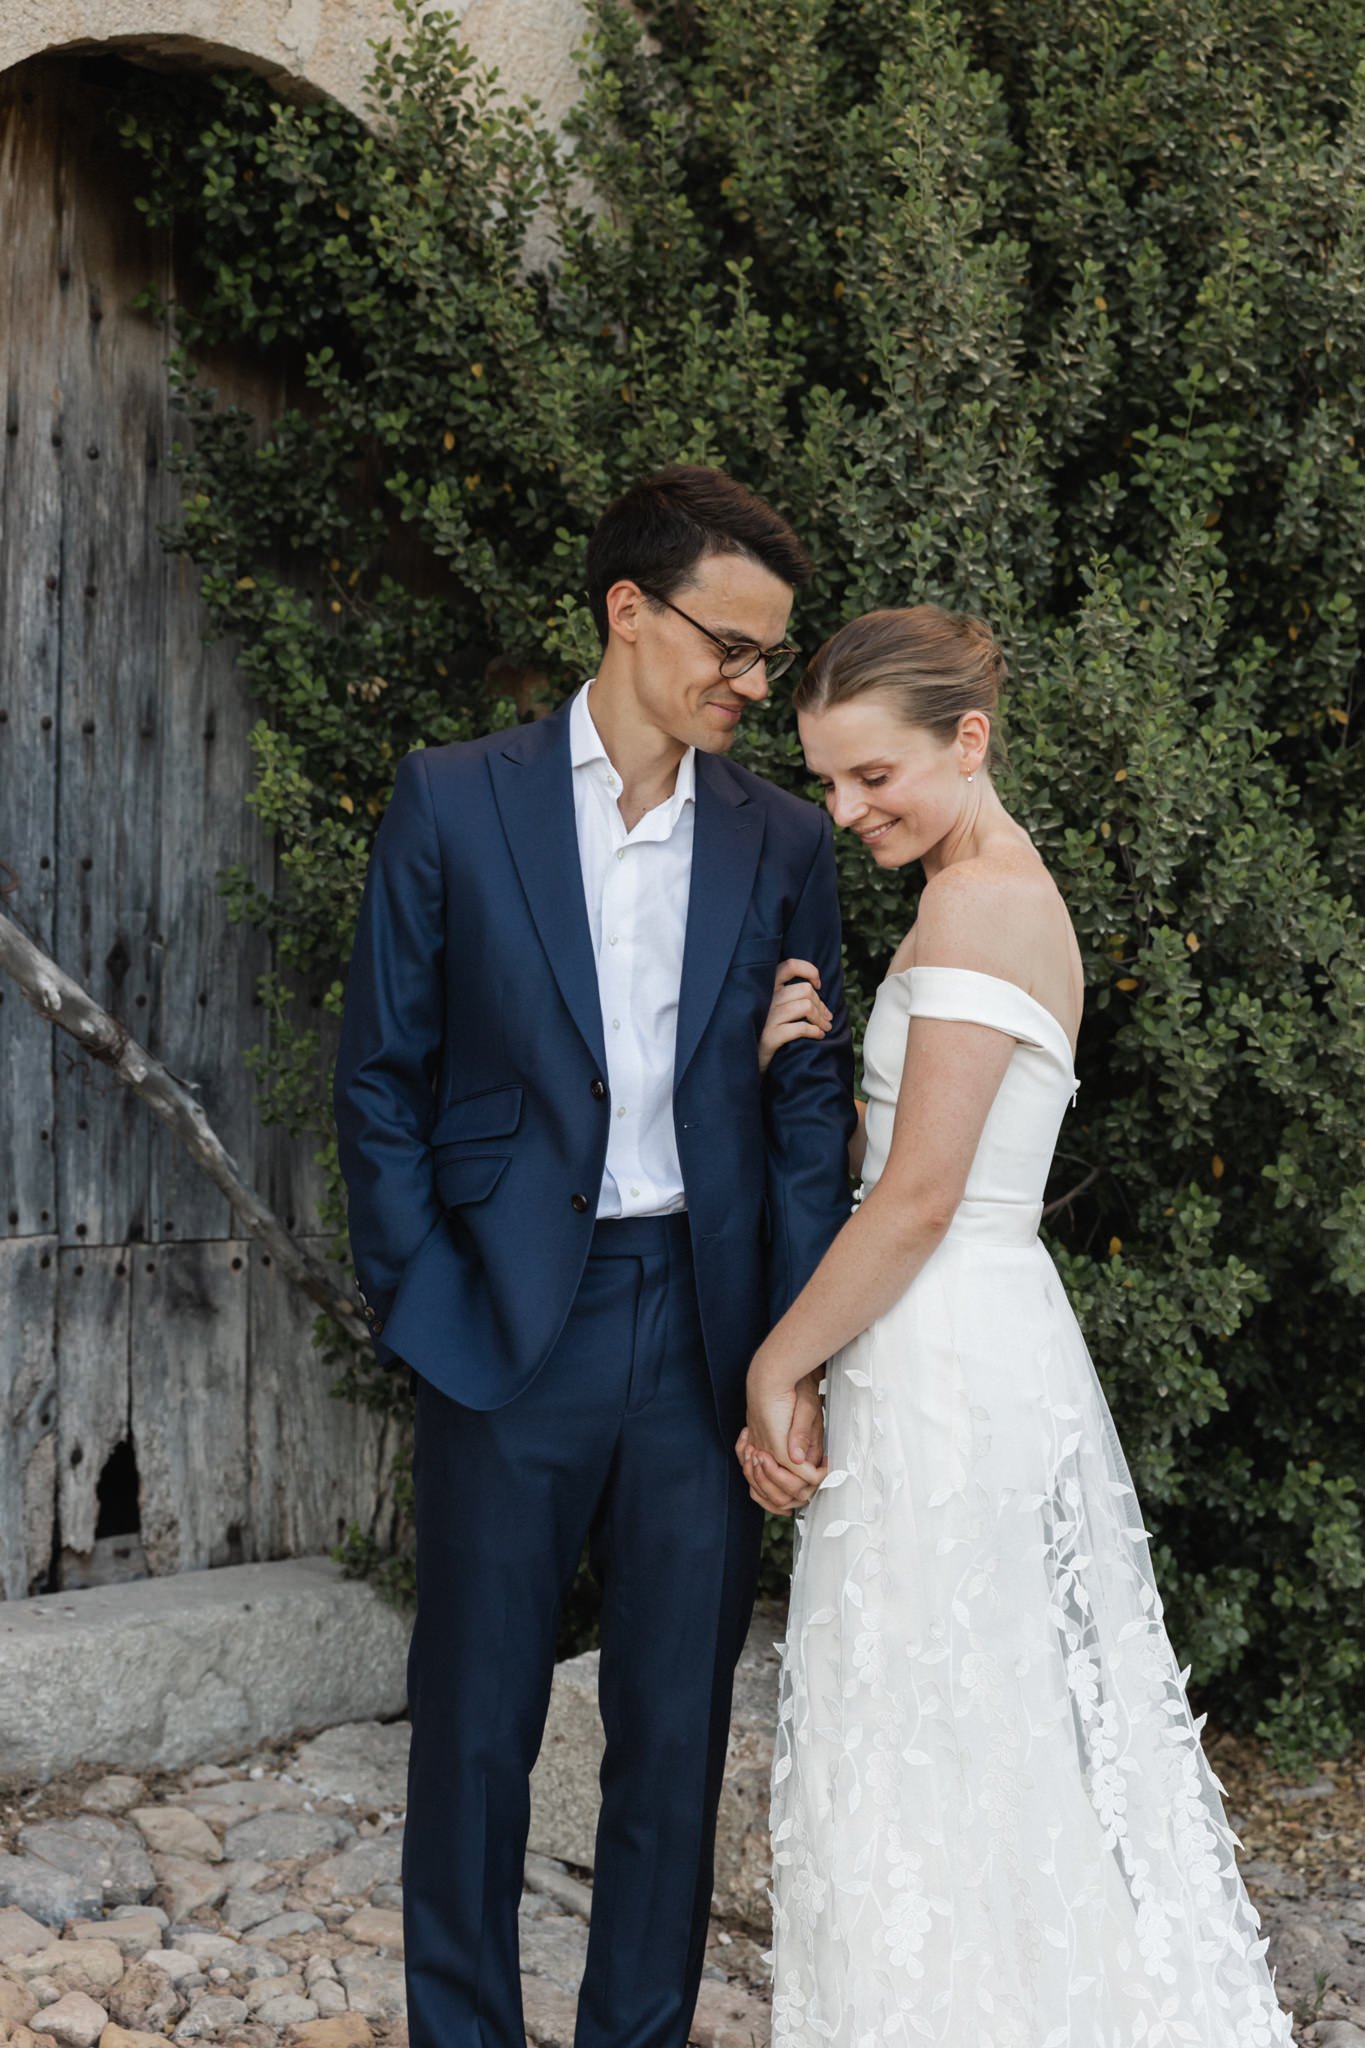 Beautiful bride Rosa wore the Harbour wedding dress and Beale skirt by Halfpenny London